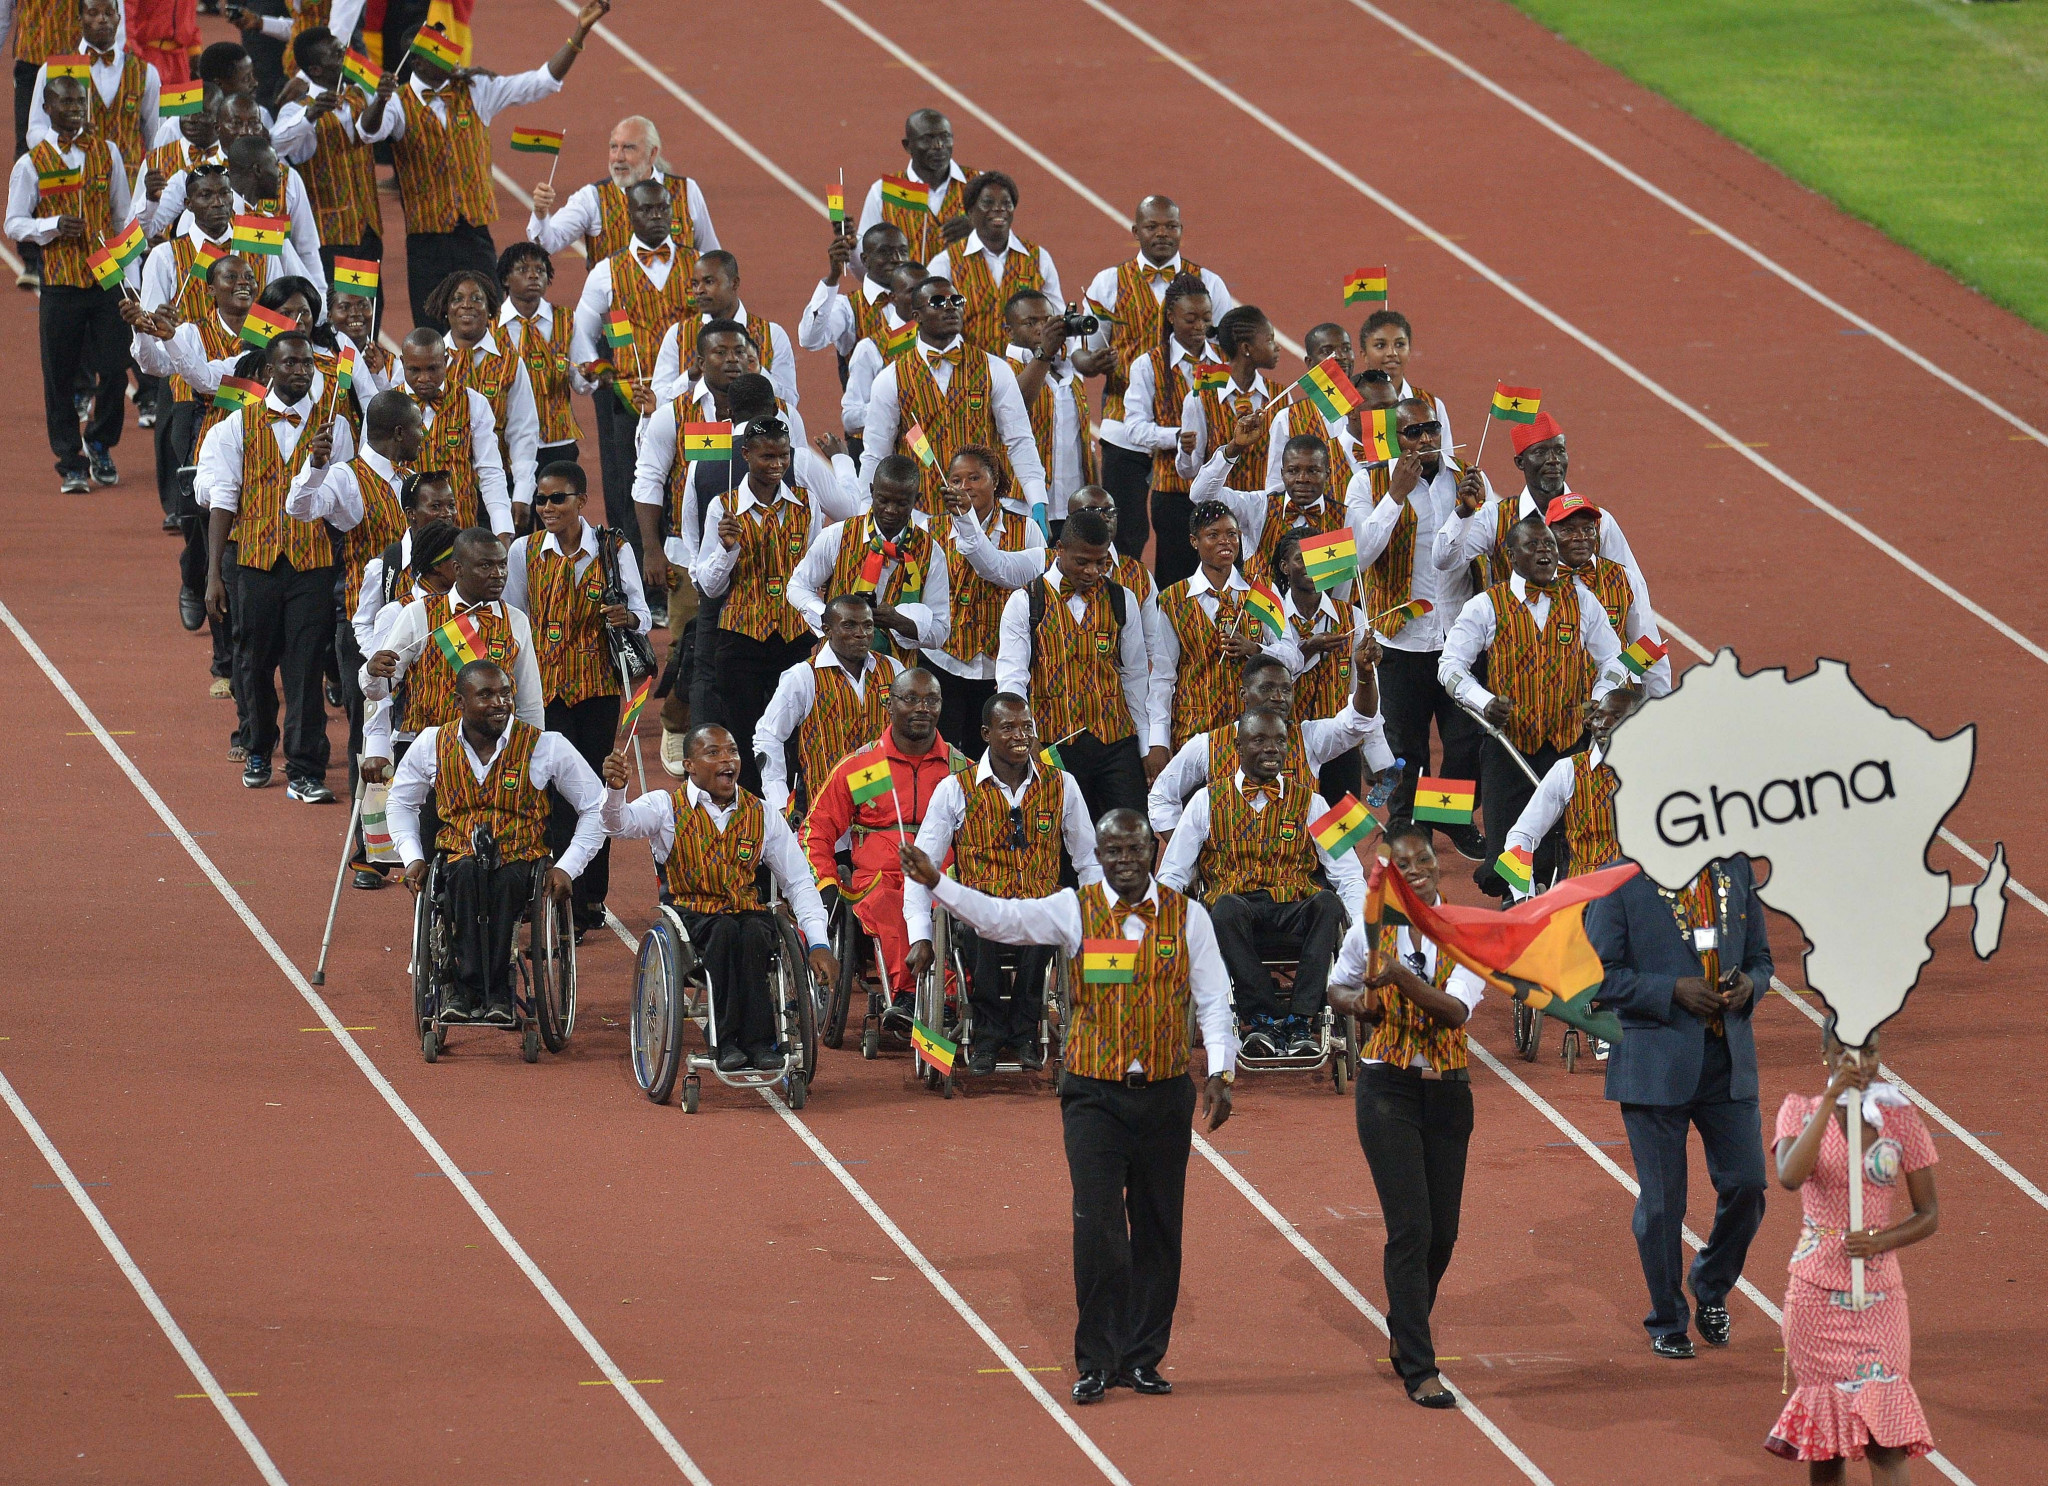 Ghana is set to host the African Games for the first time next year, and 14 of its athletes are set to take part in a one-month training camp in France ©Getty Images